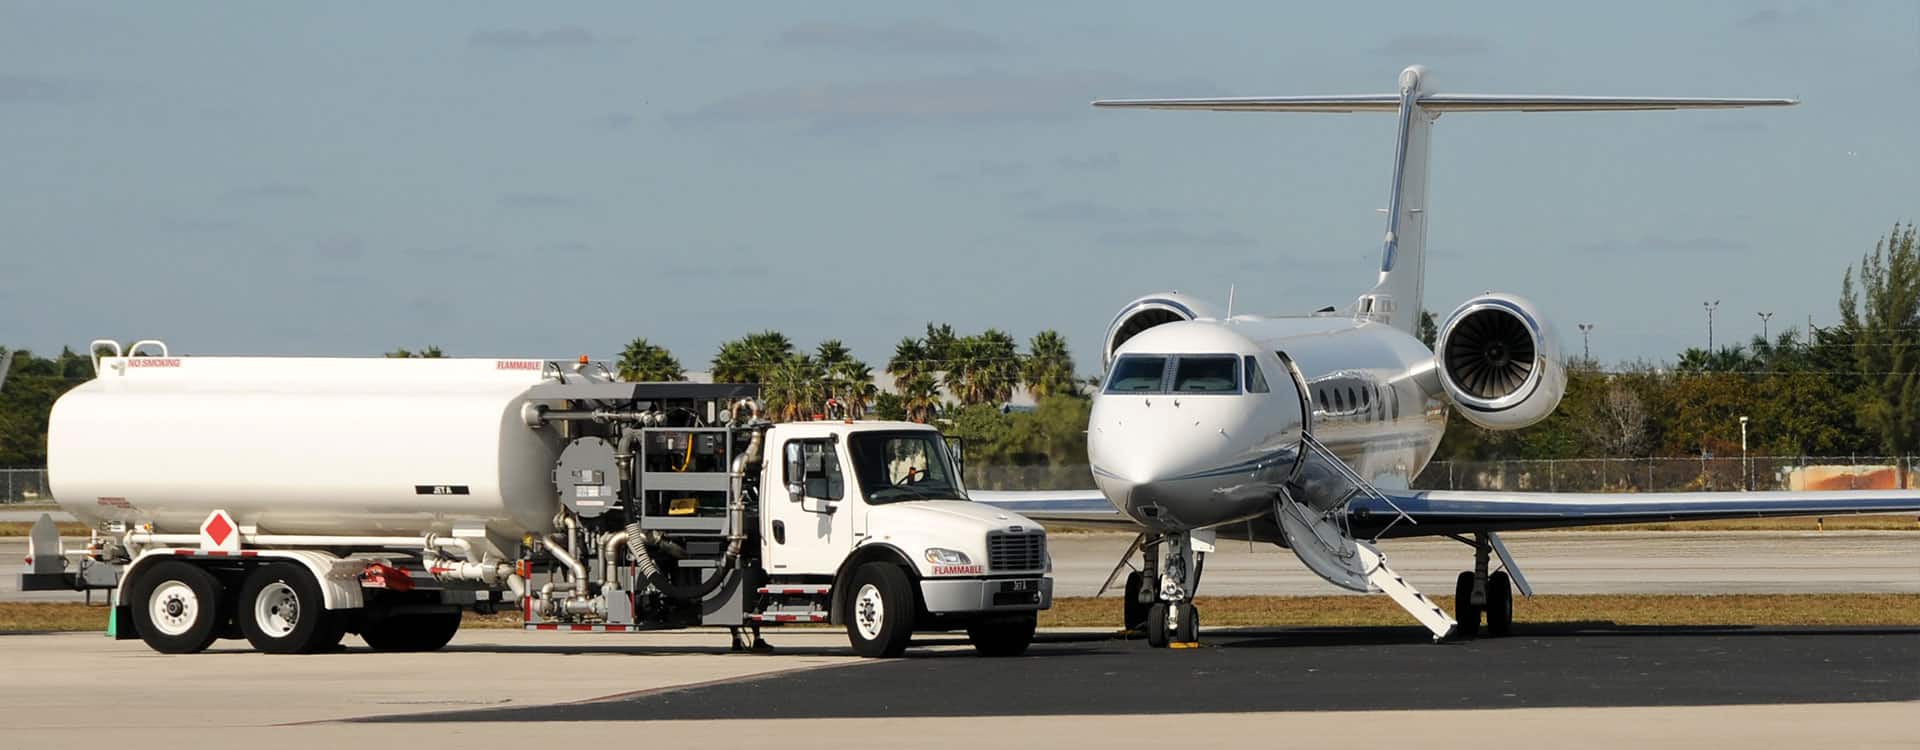 A Short Guide to Sourcing Aviation Fuel